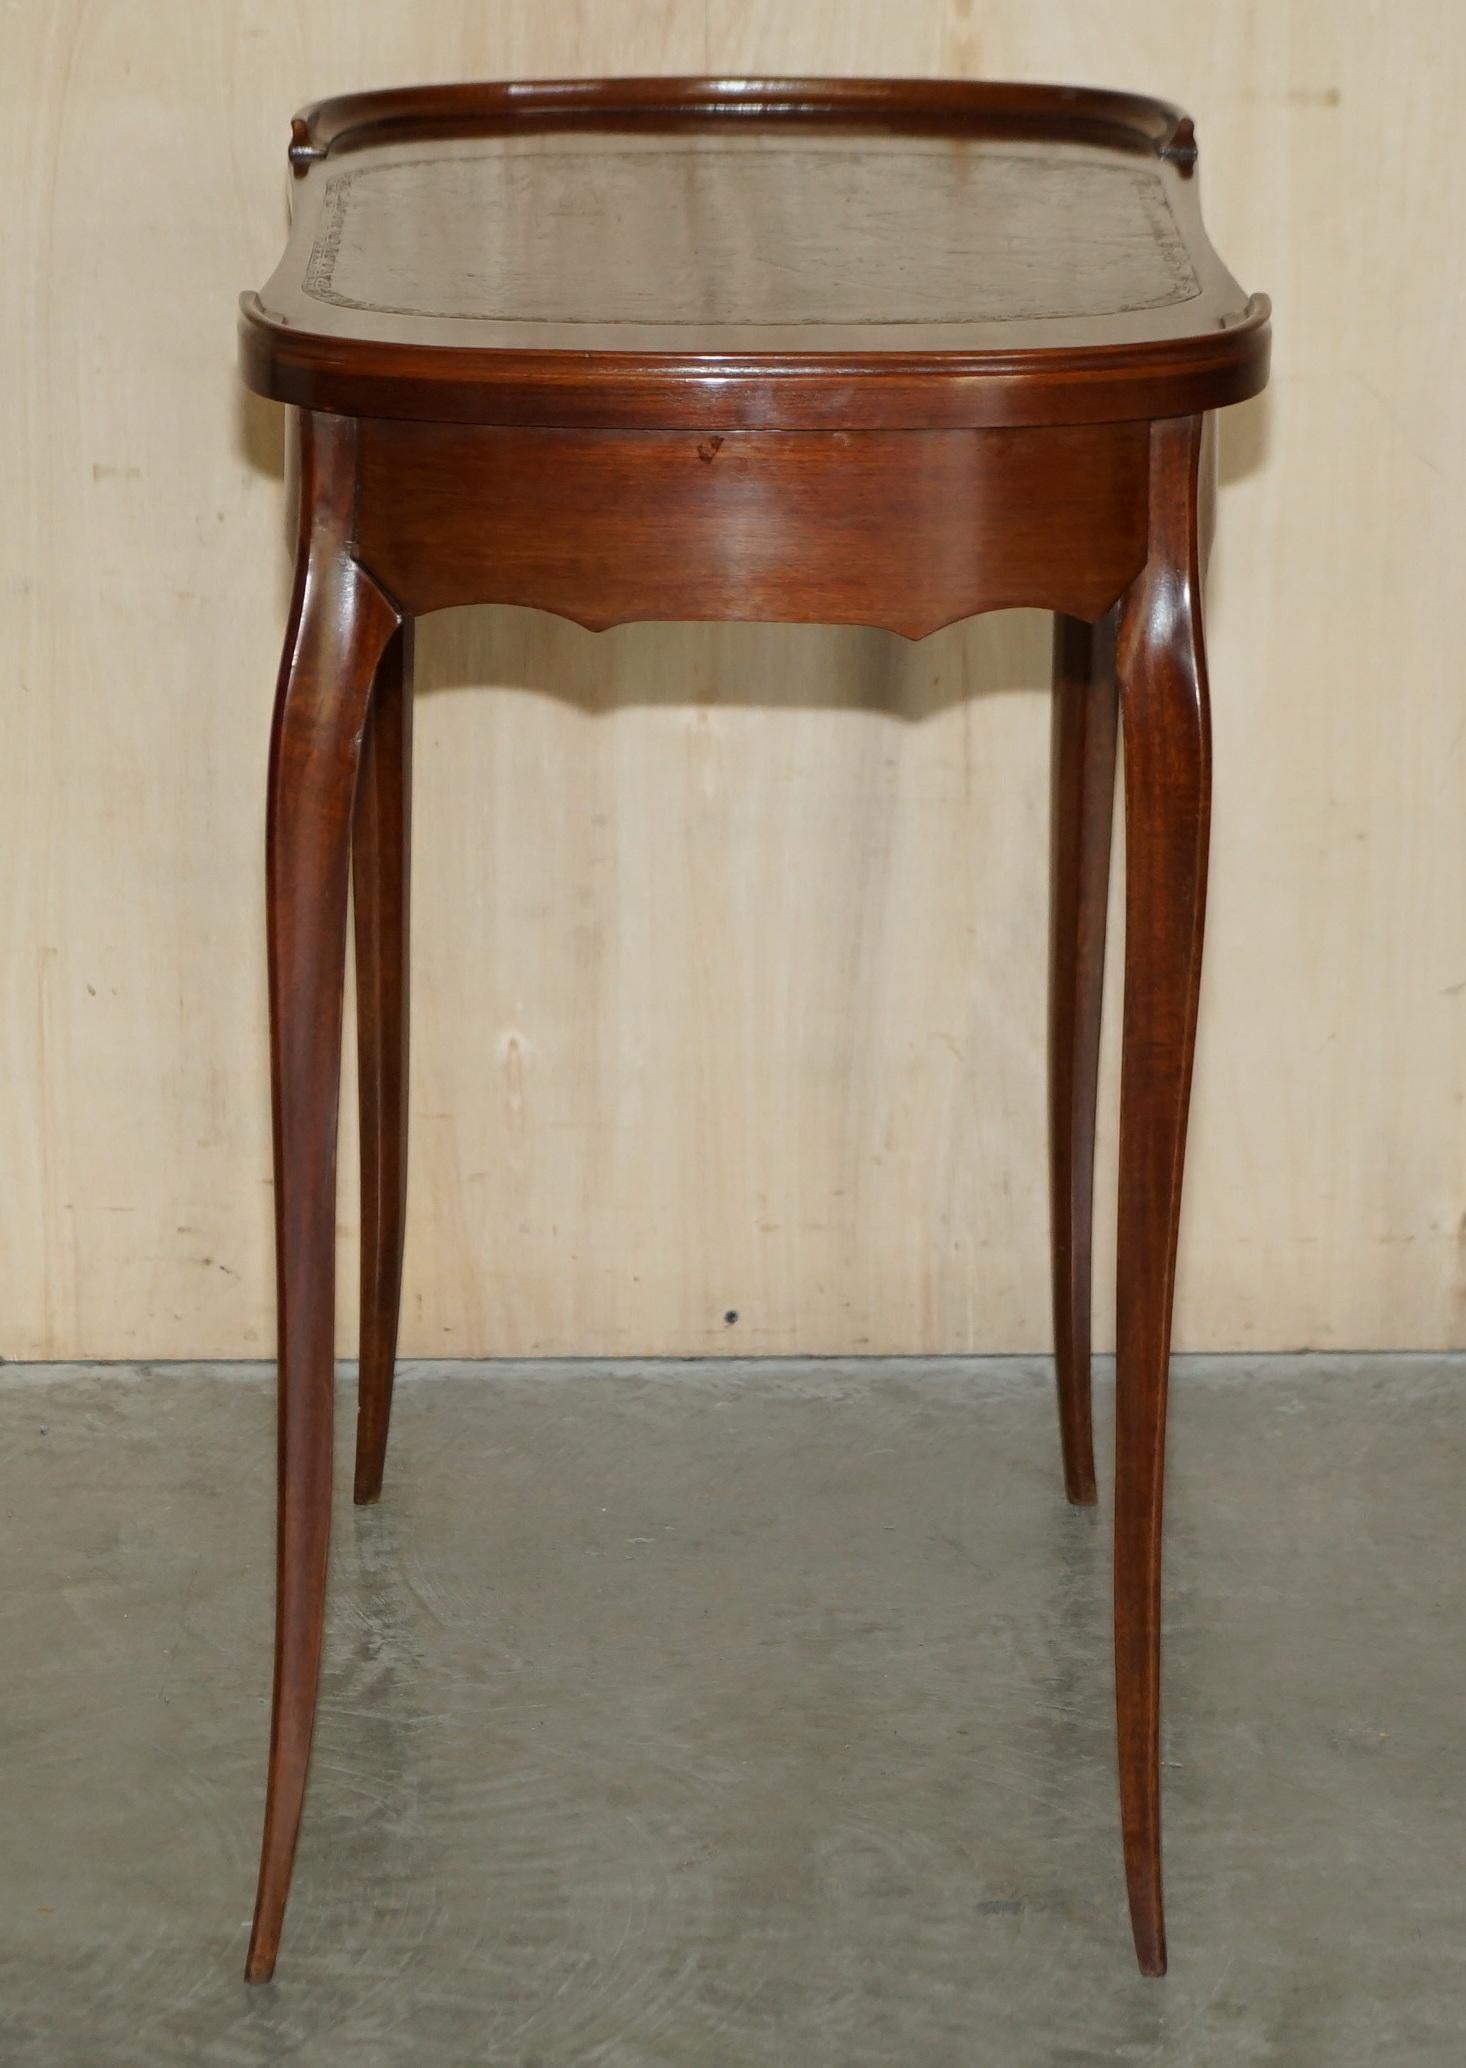 Restored Antique Kidney Shaped Occasional Table with Drawers Brown Leather Top For Sale 9